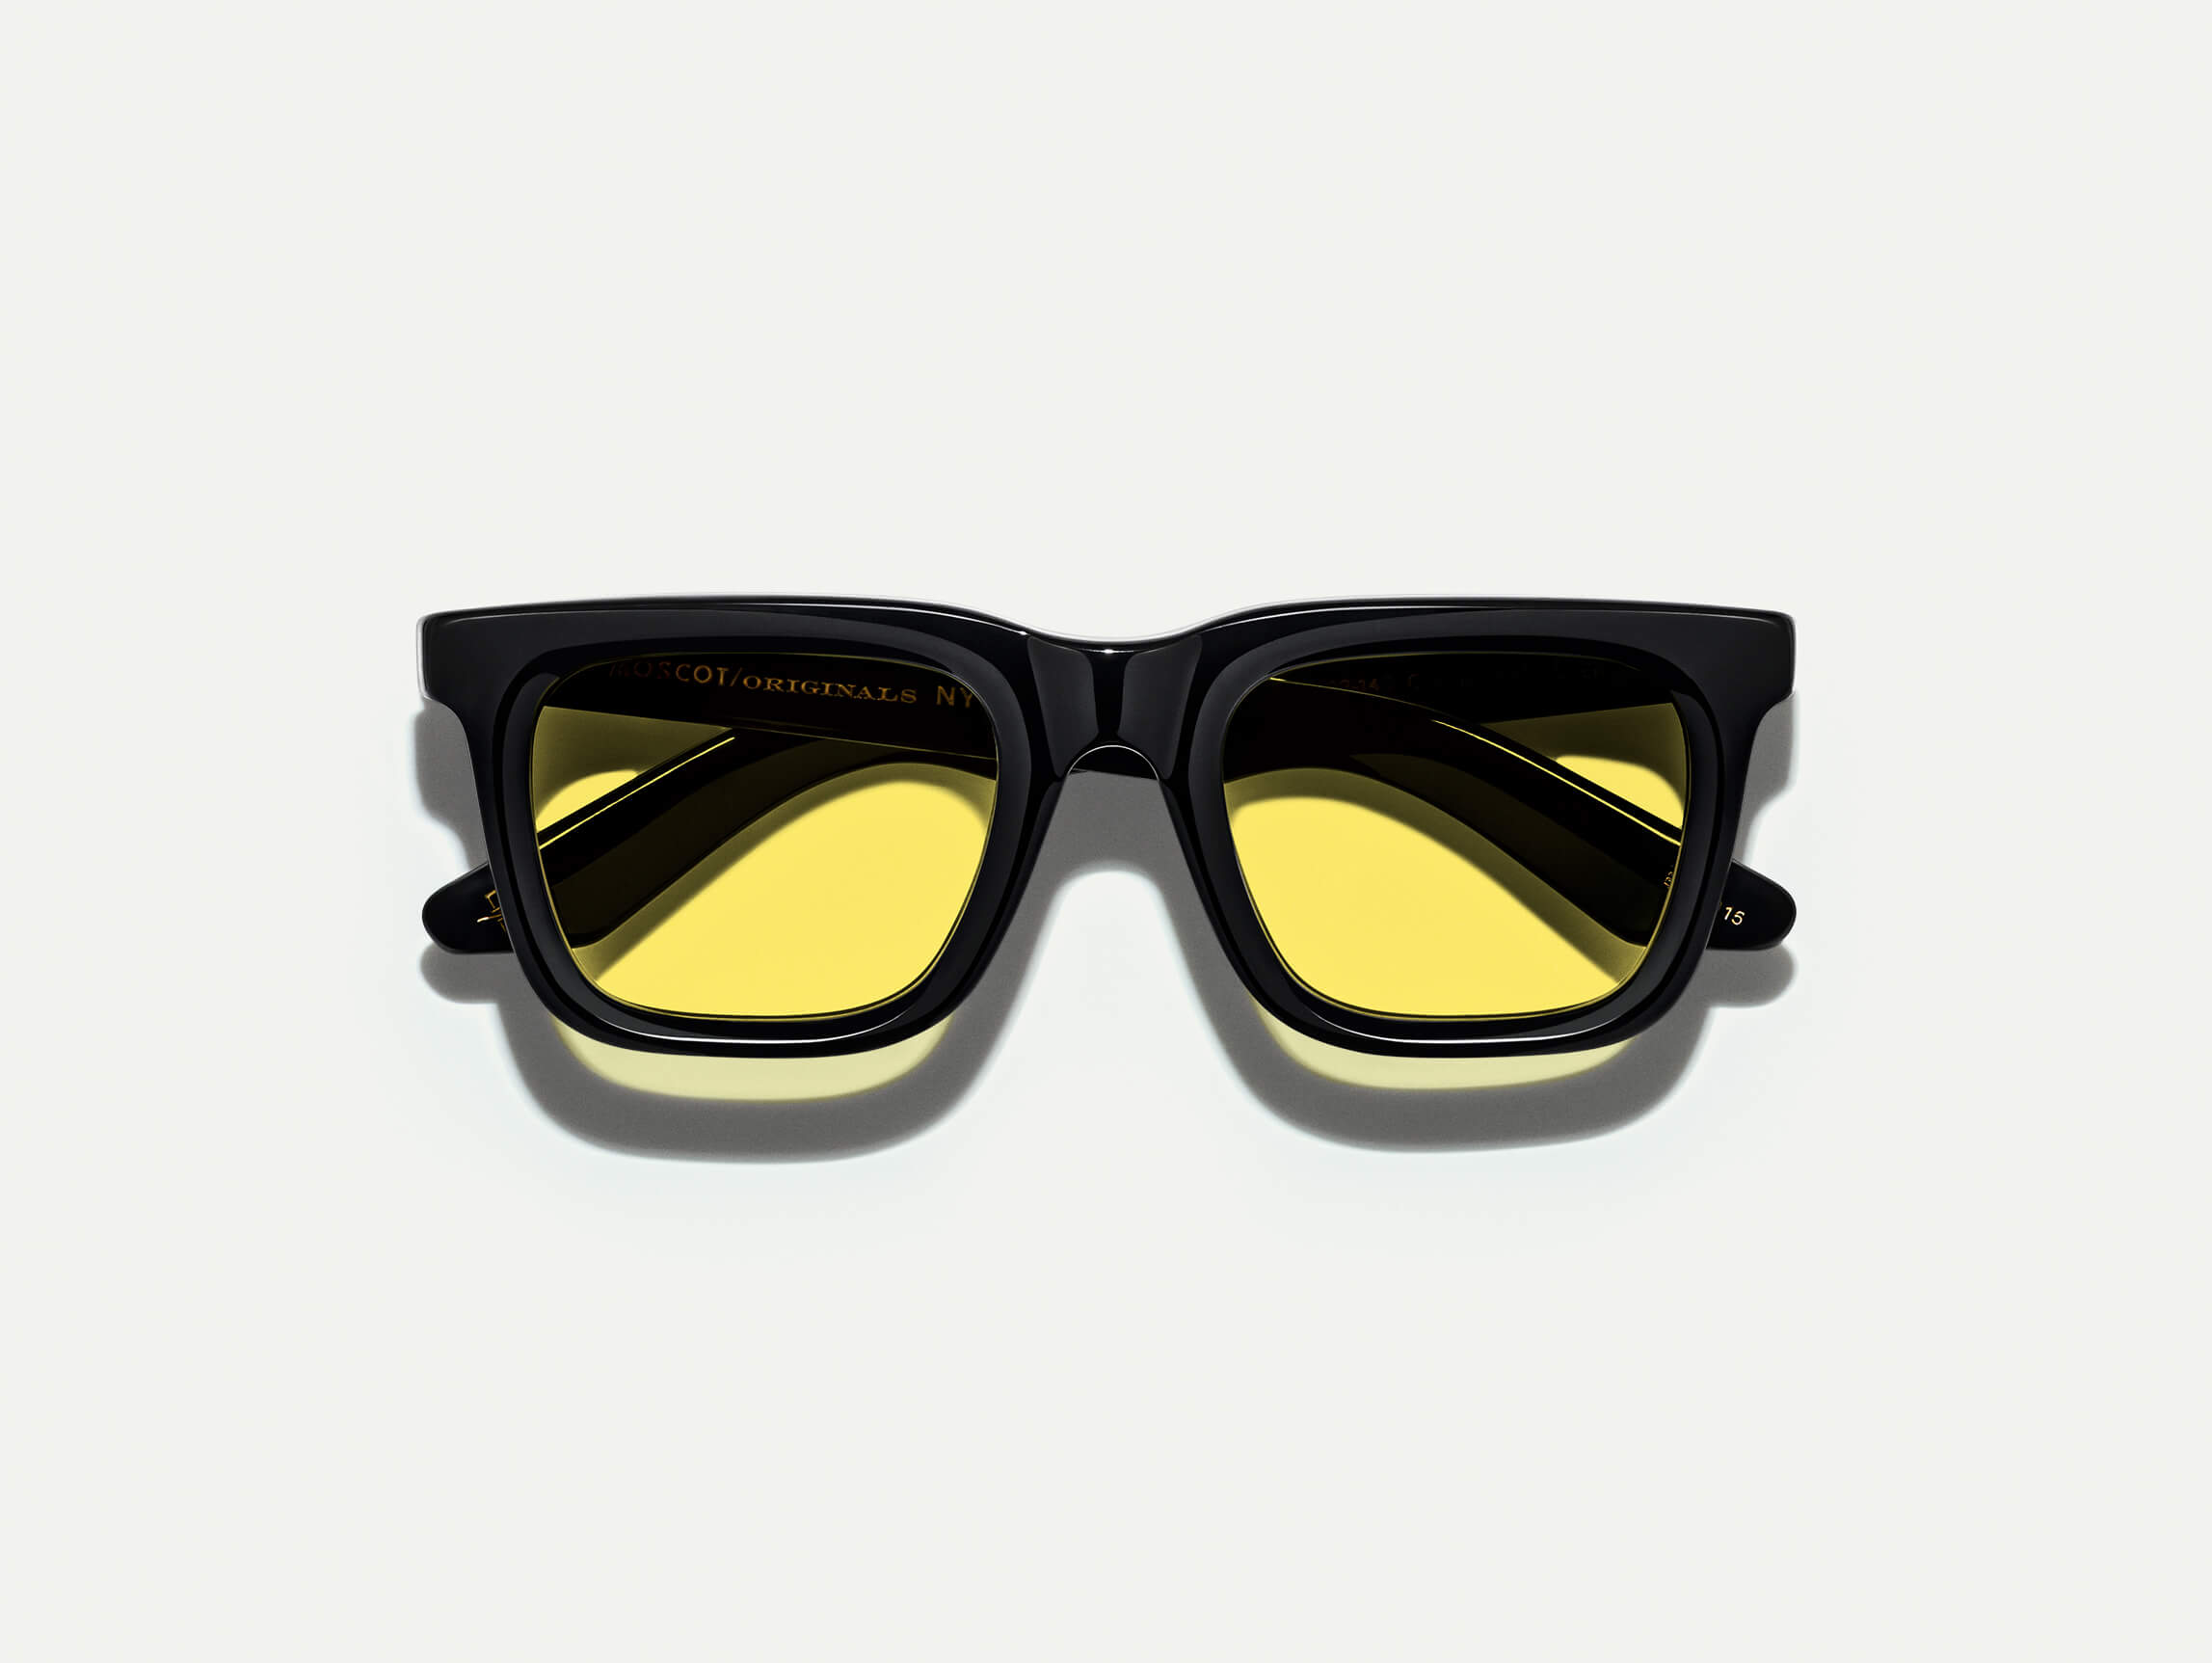 The RIZIK Black with Mellow Yellow Tinted Lenses